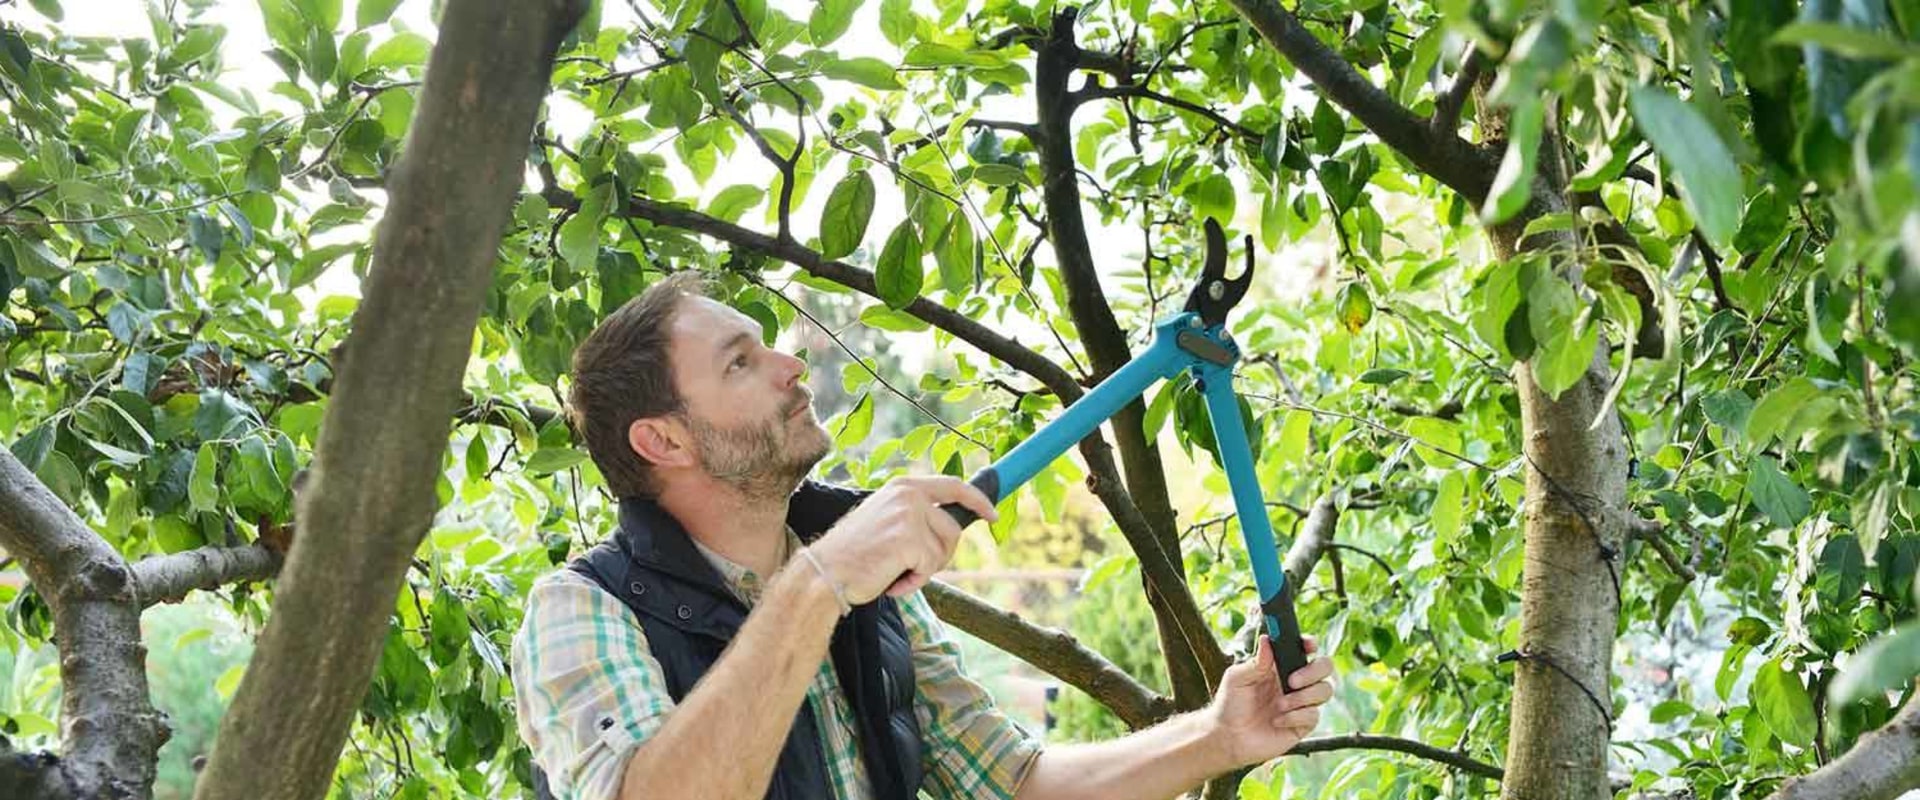 Crown Reduction Pruning: What You Need to Know